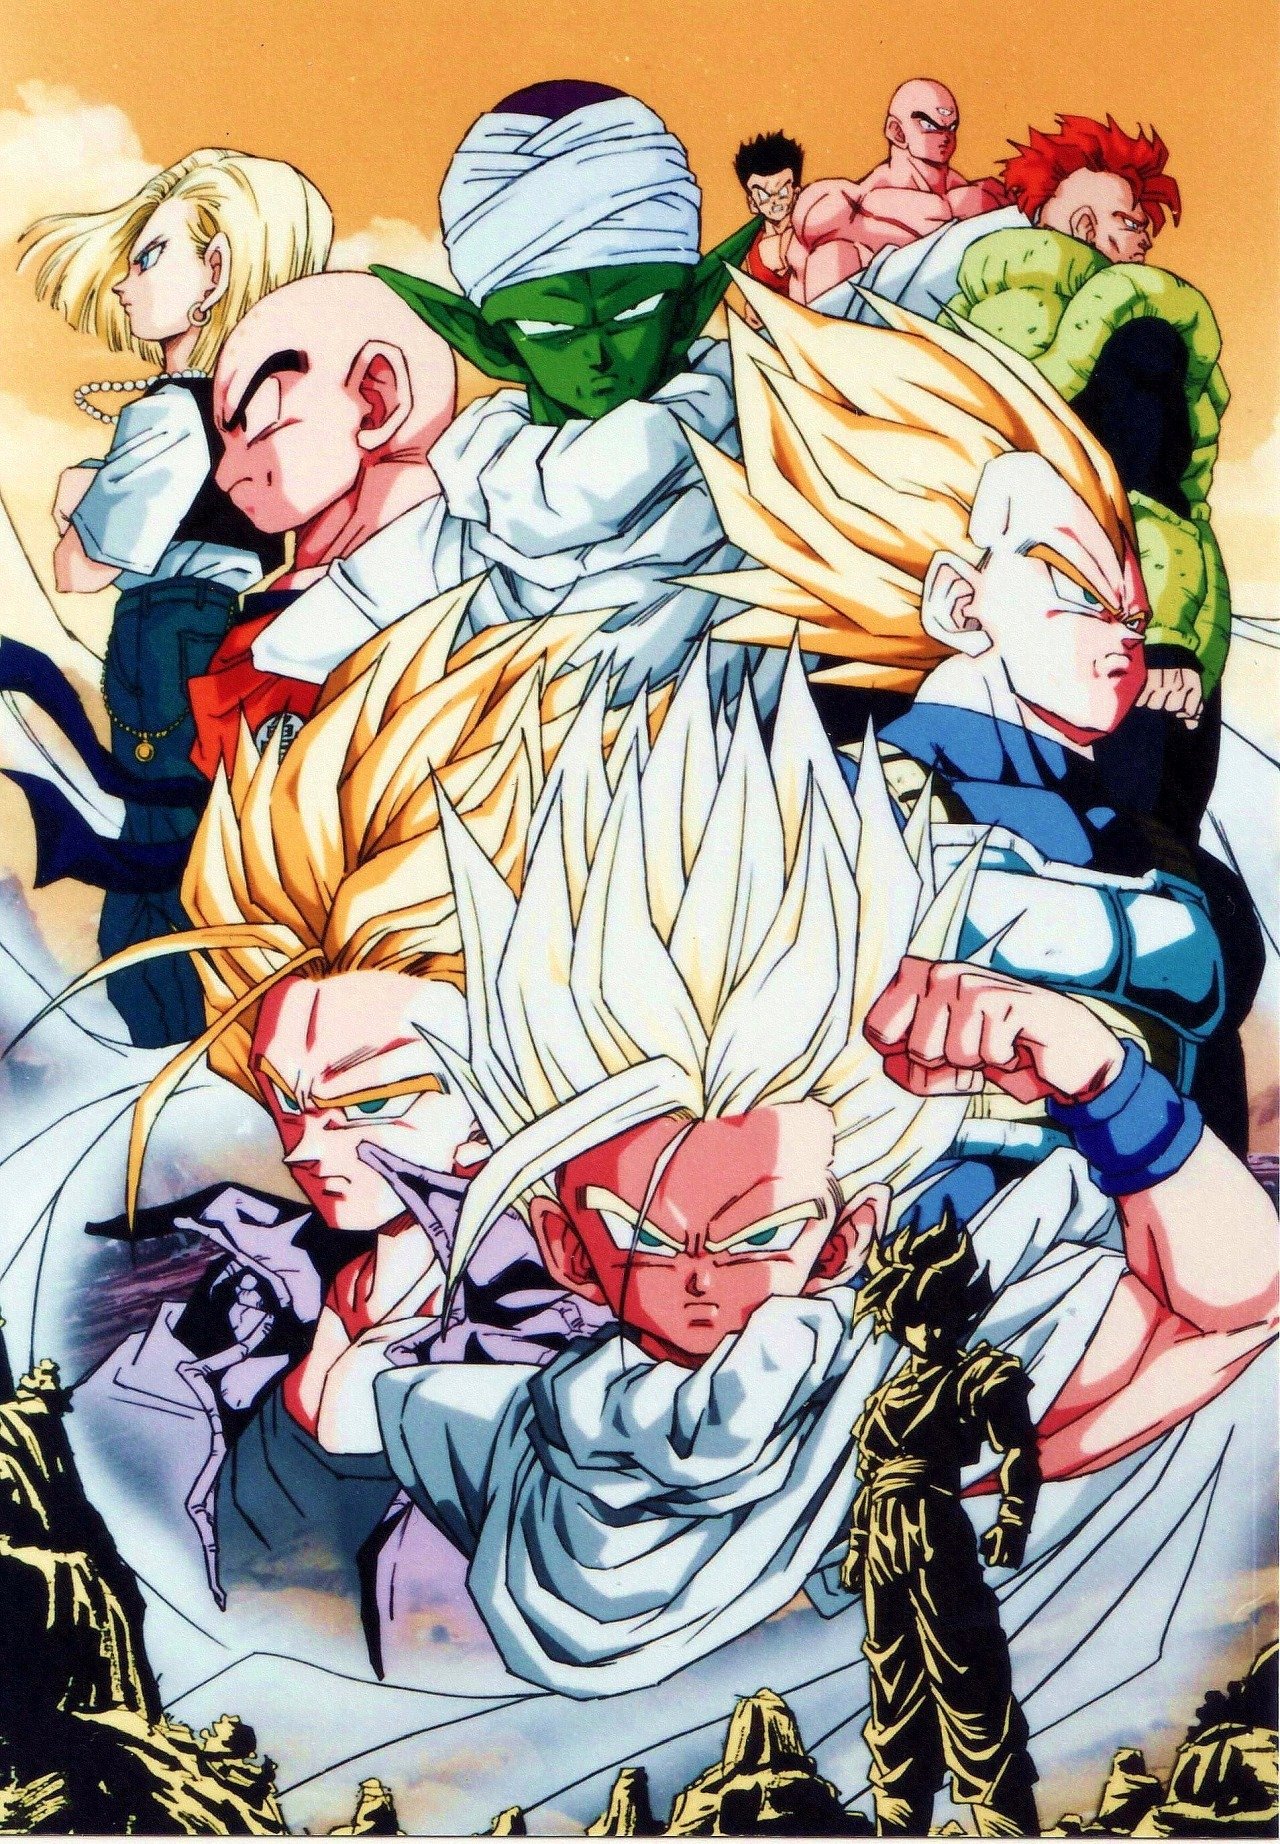 Jax Me Personally, 80s & 90s DBZ Art will always be my Primary Aesthetic To me this look is the UNDISPUTED GOAT. & TBH lookin thru all this amazing